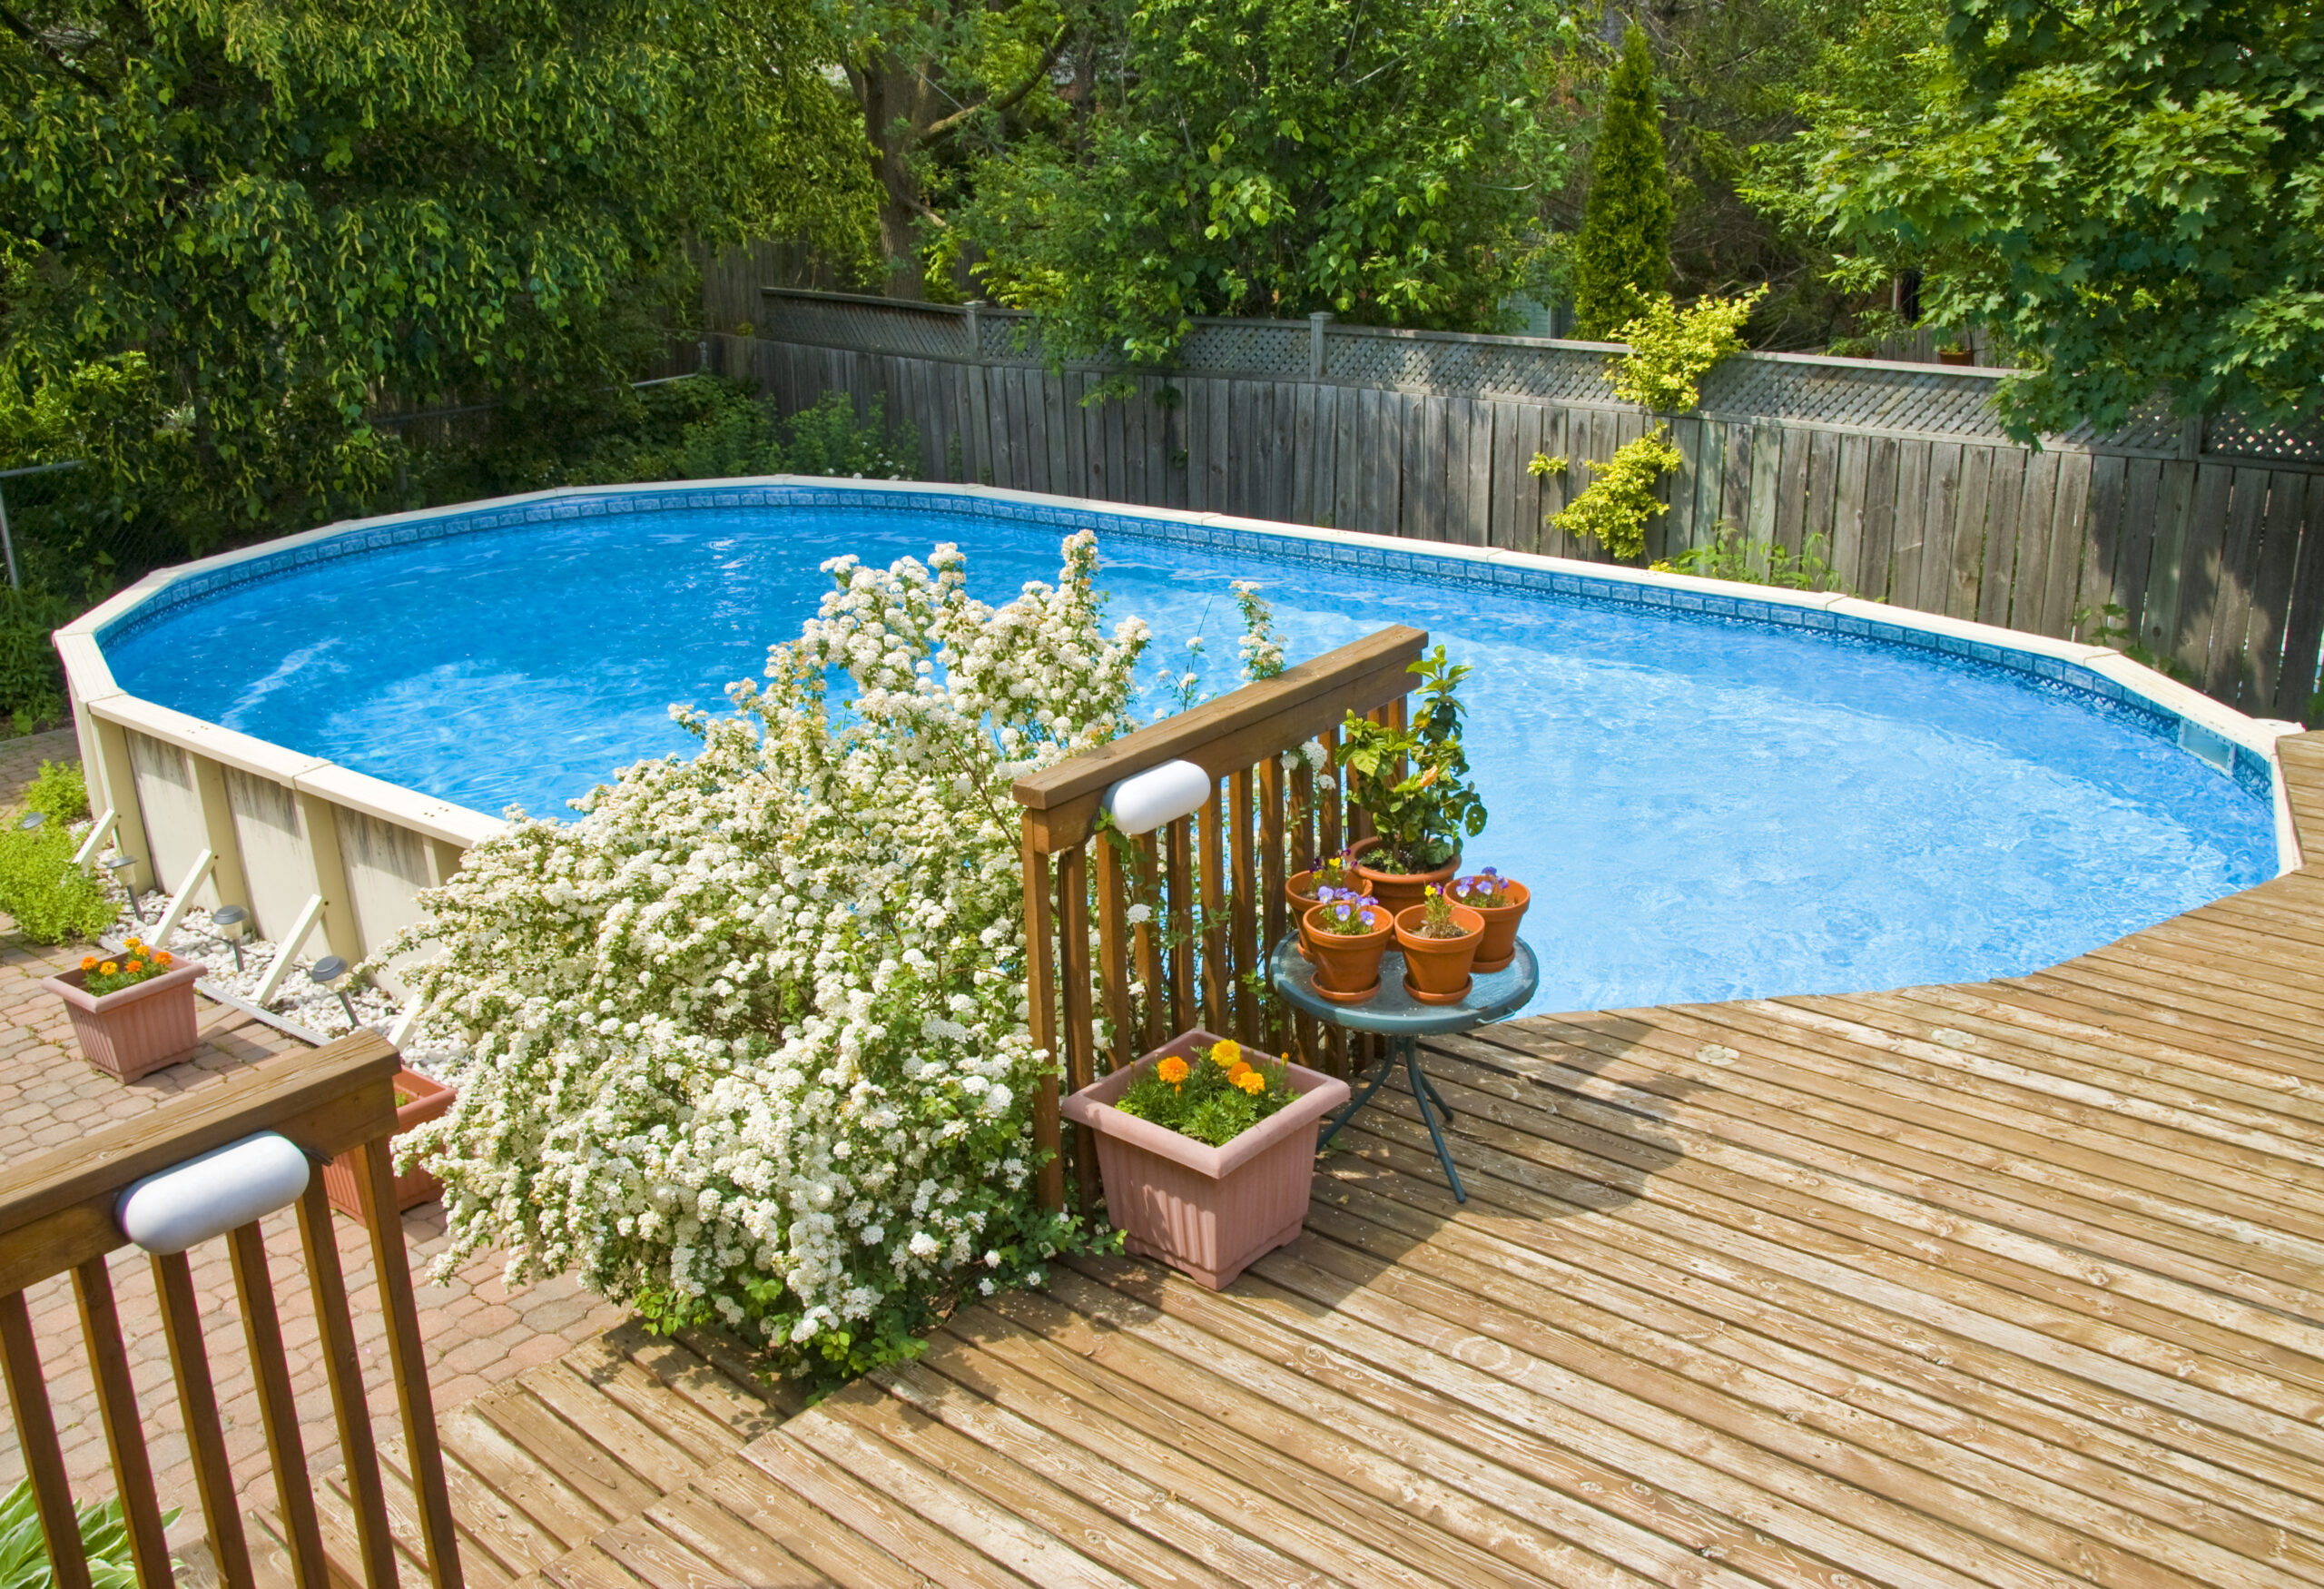 Tips for Landscaping Around Above-Ground Pools